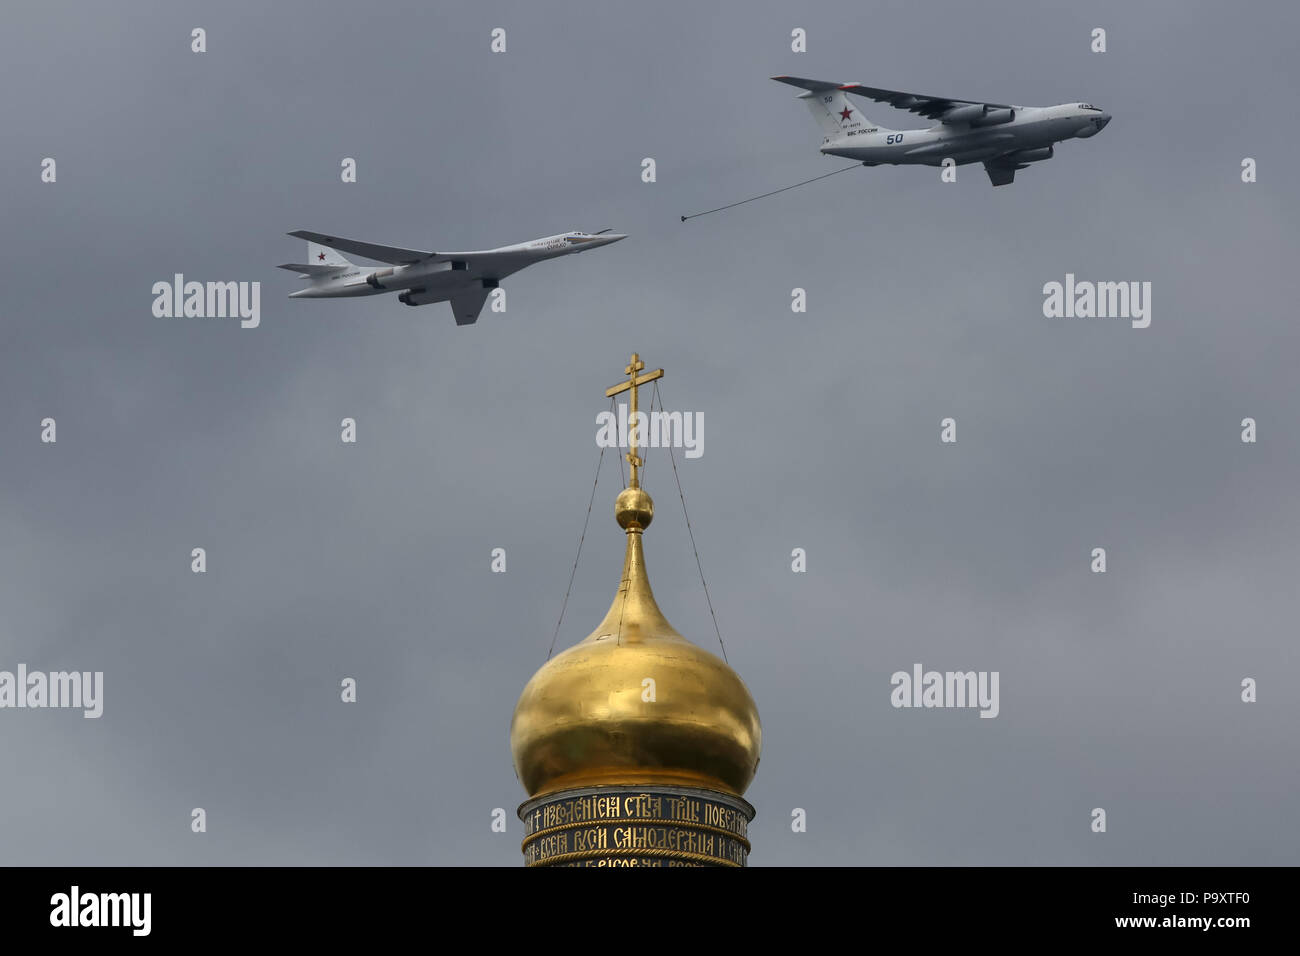 The Ilyushin Il-78 tanker airplane flies in formation with Tupolev Tu-160 strategic bomber   over Ivan the Great Bell Tower of the Kremlin of Moscow d Stock Photo